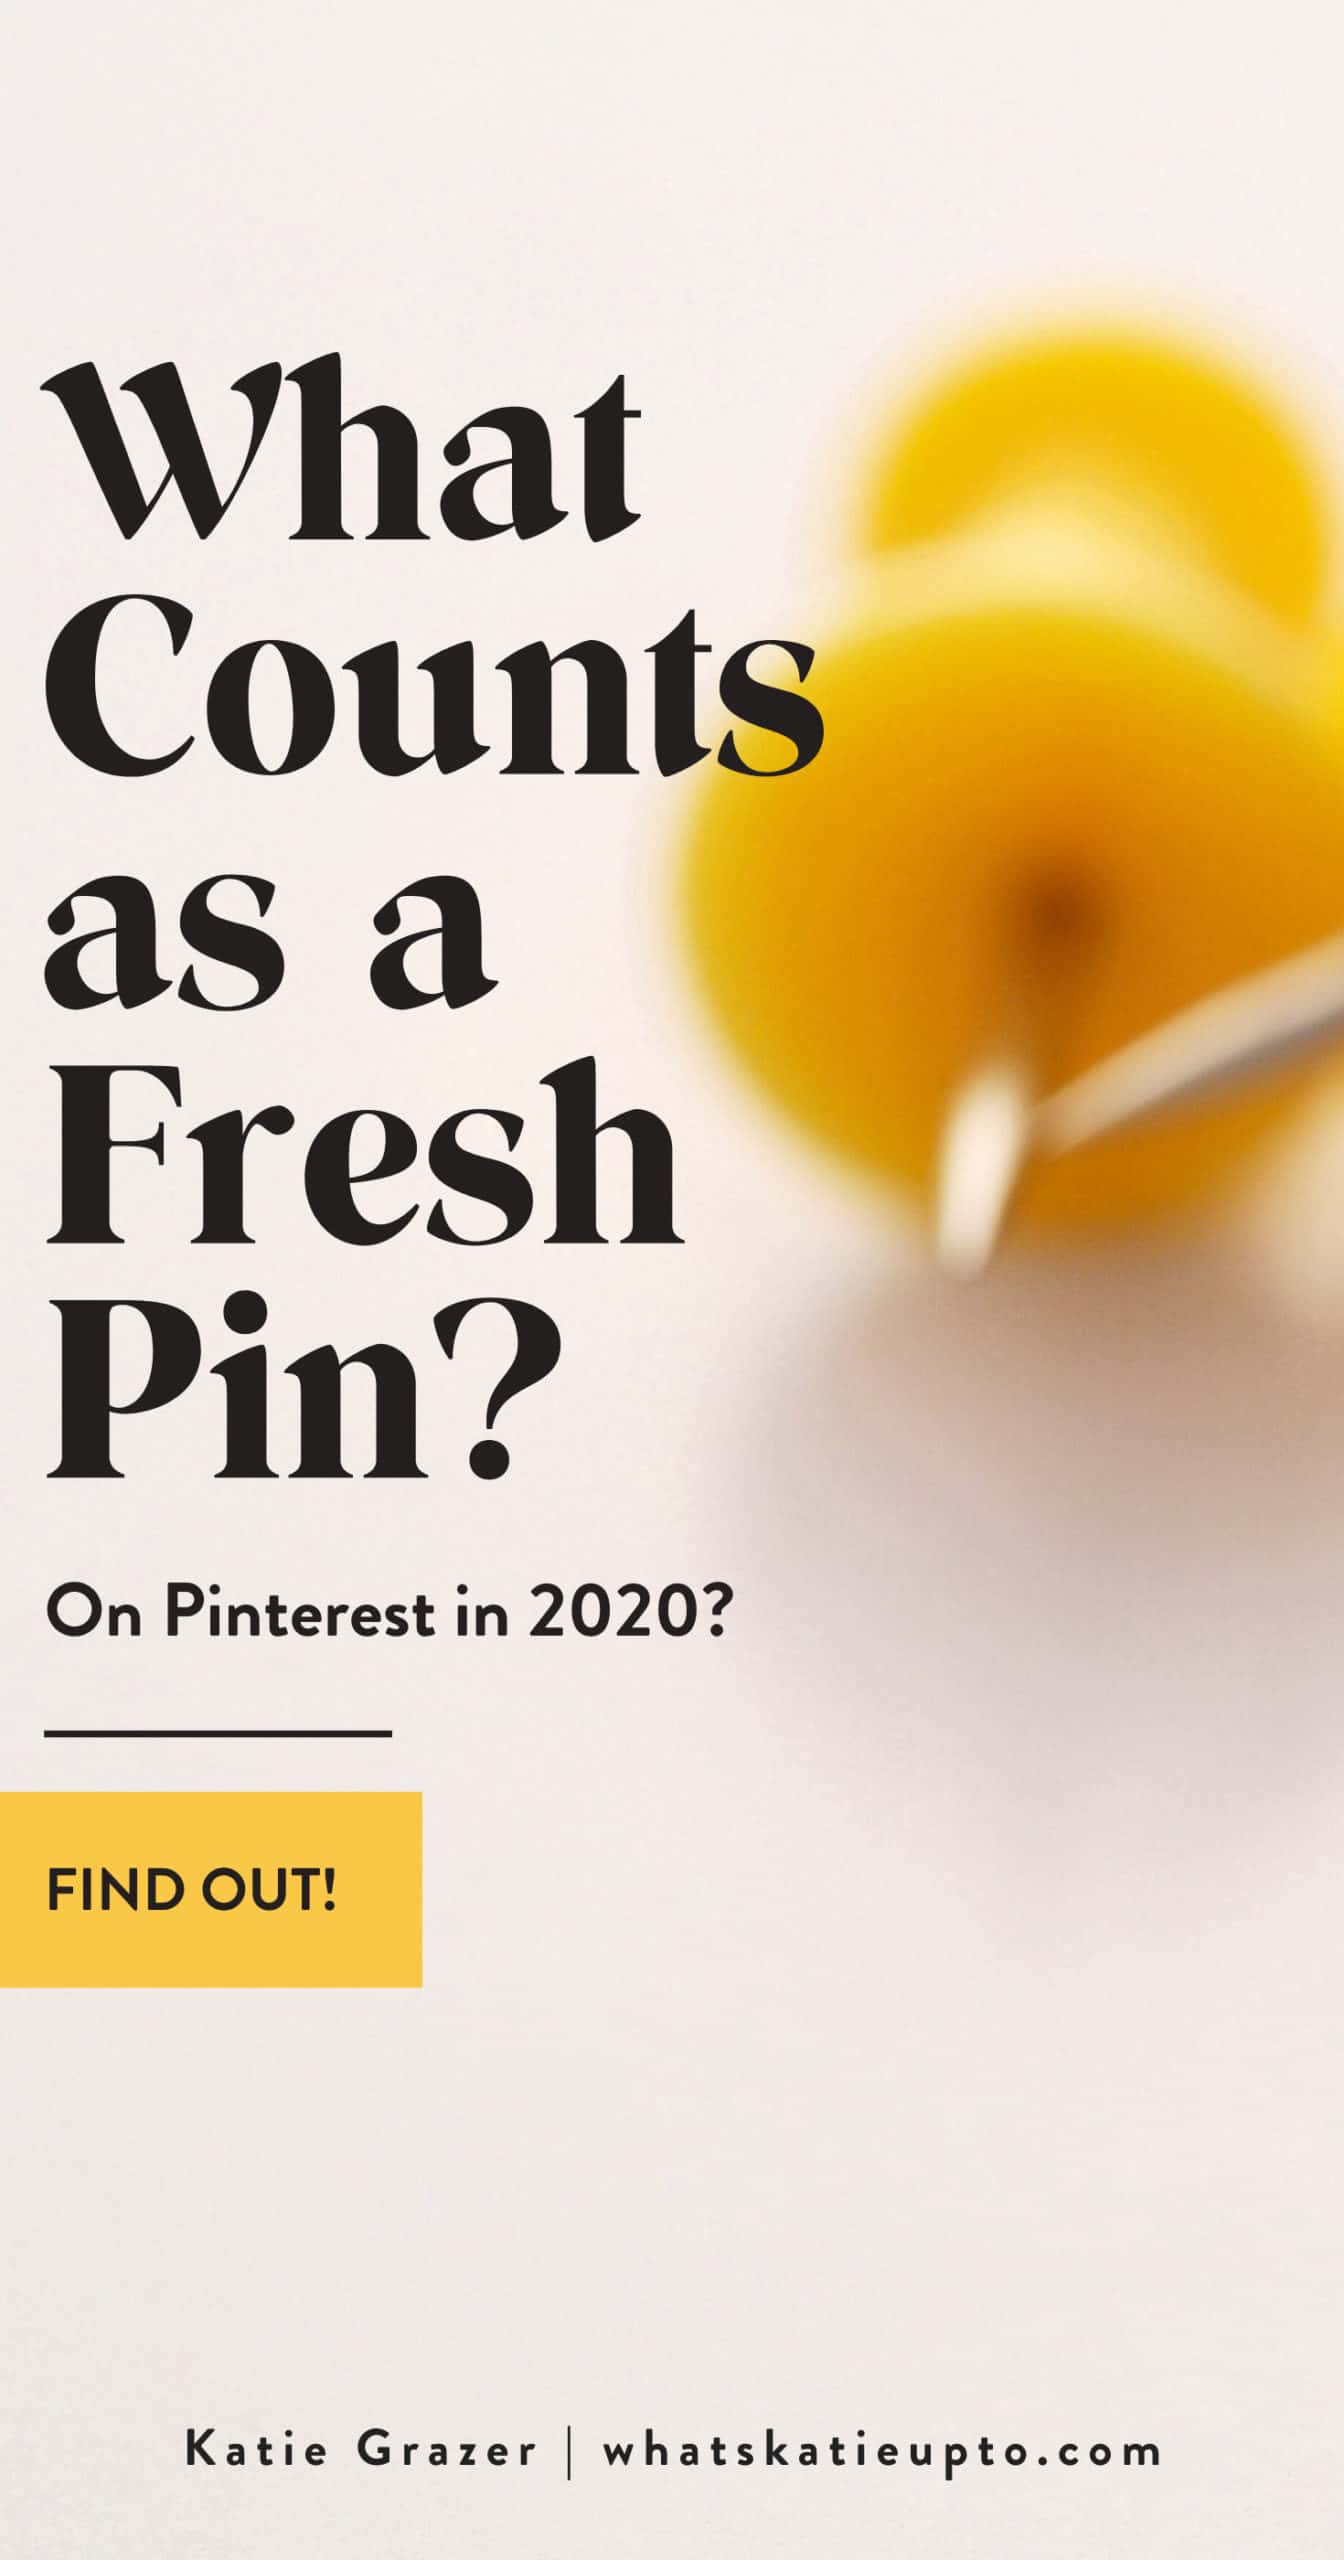 How to Create Pinterest Pins in 6 easy Steps